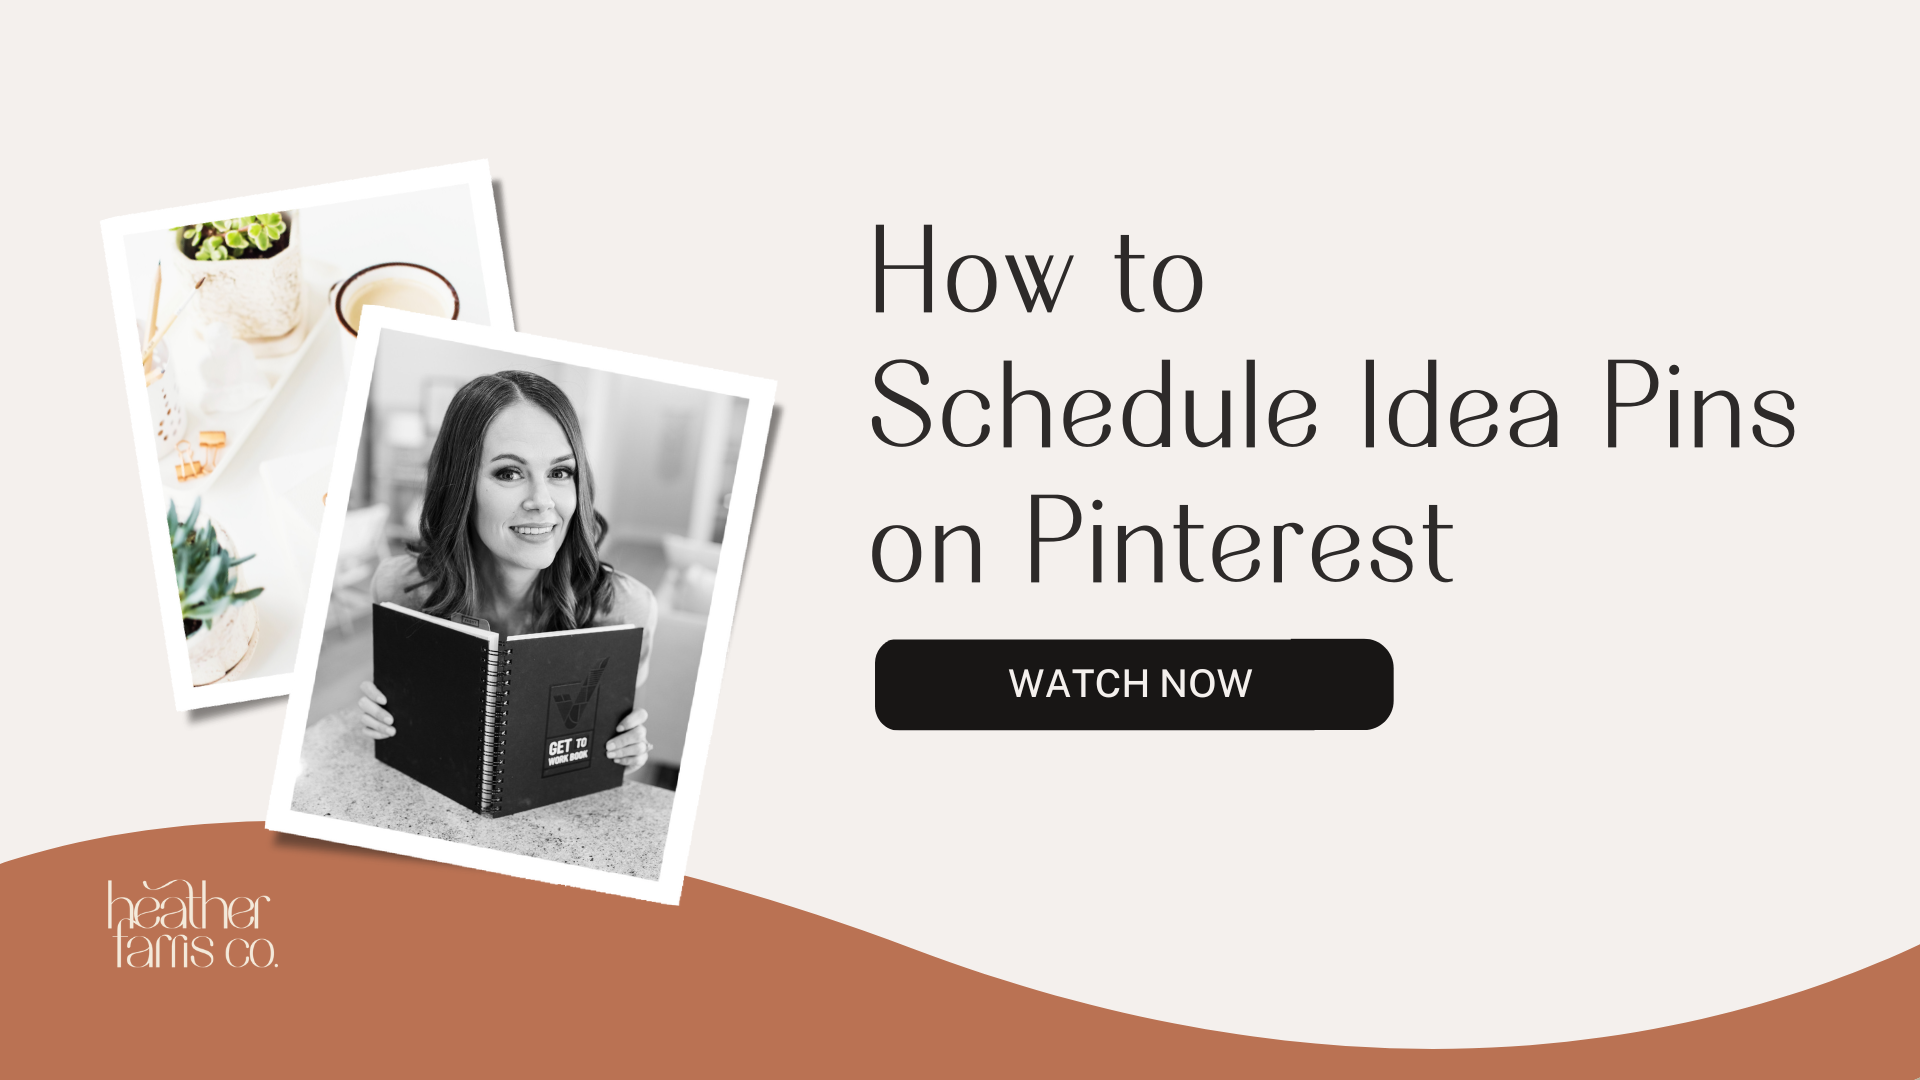 How to Schedule Idea Pins on Pinterest